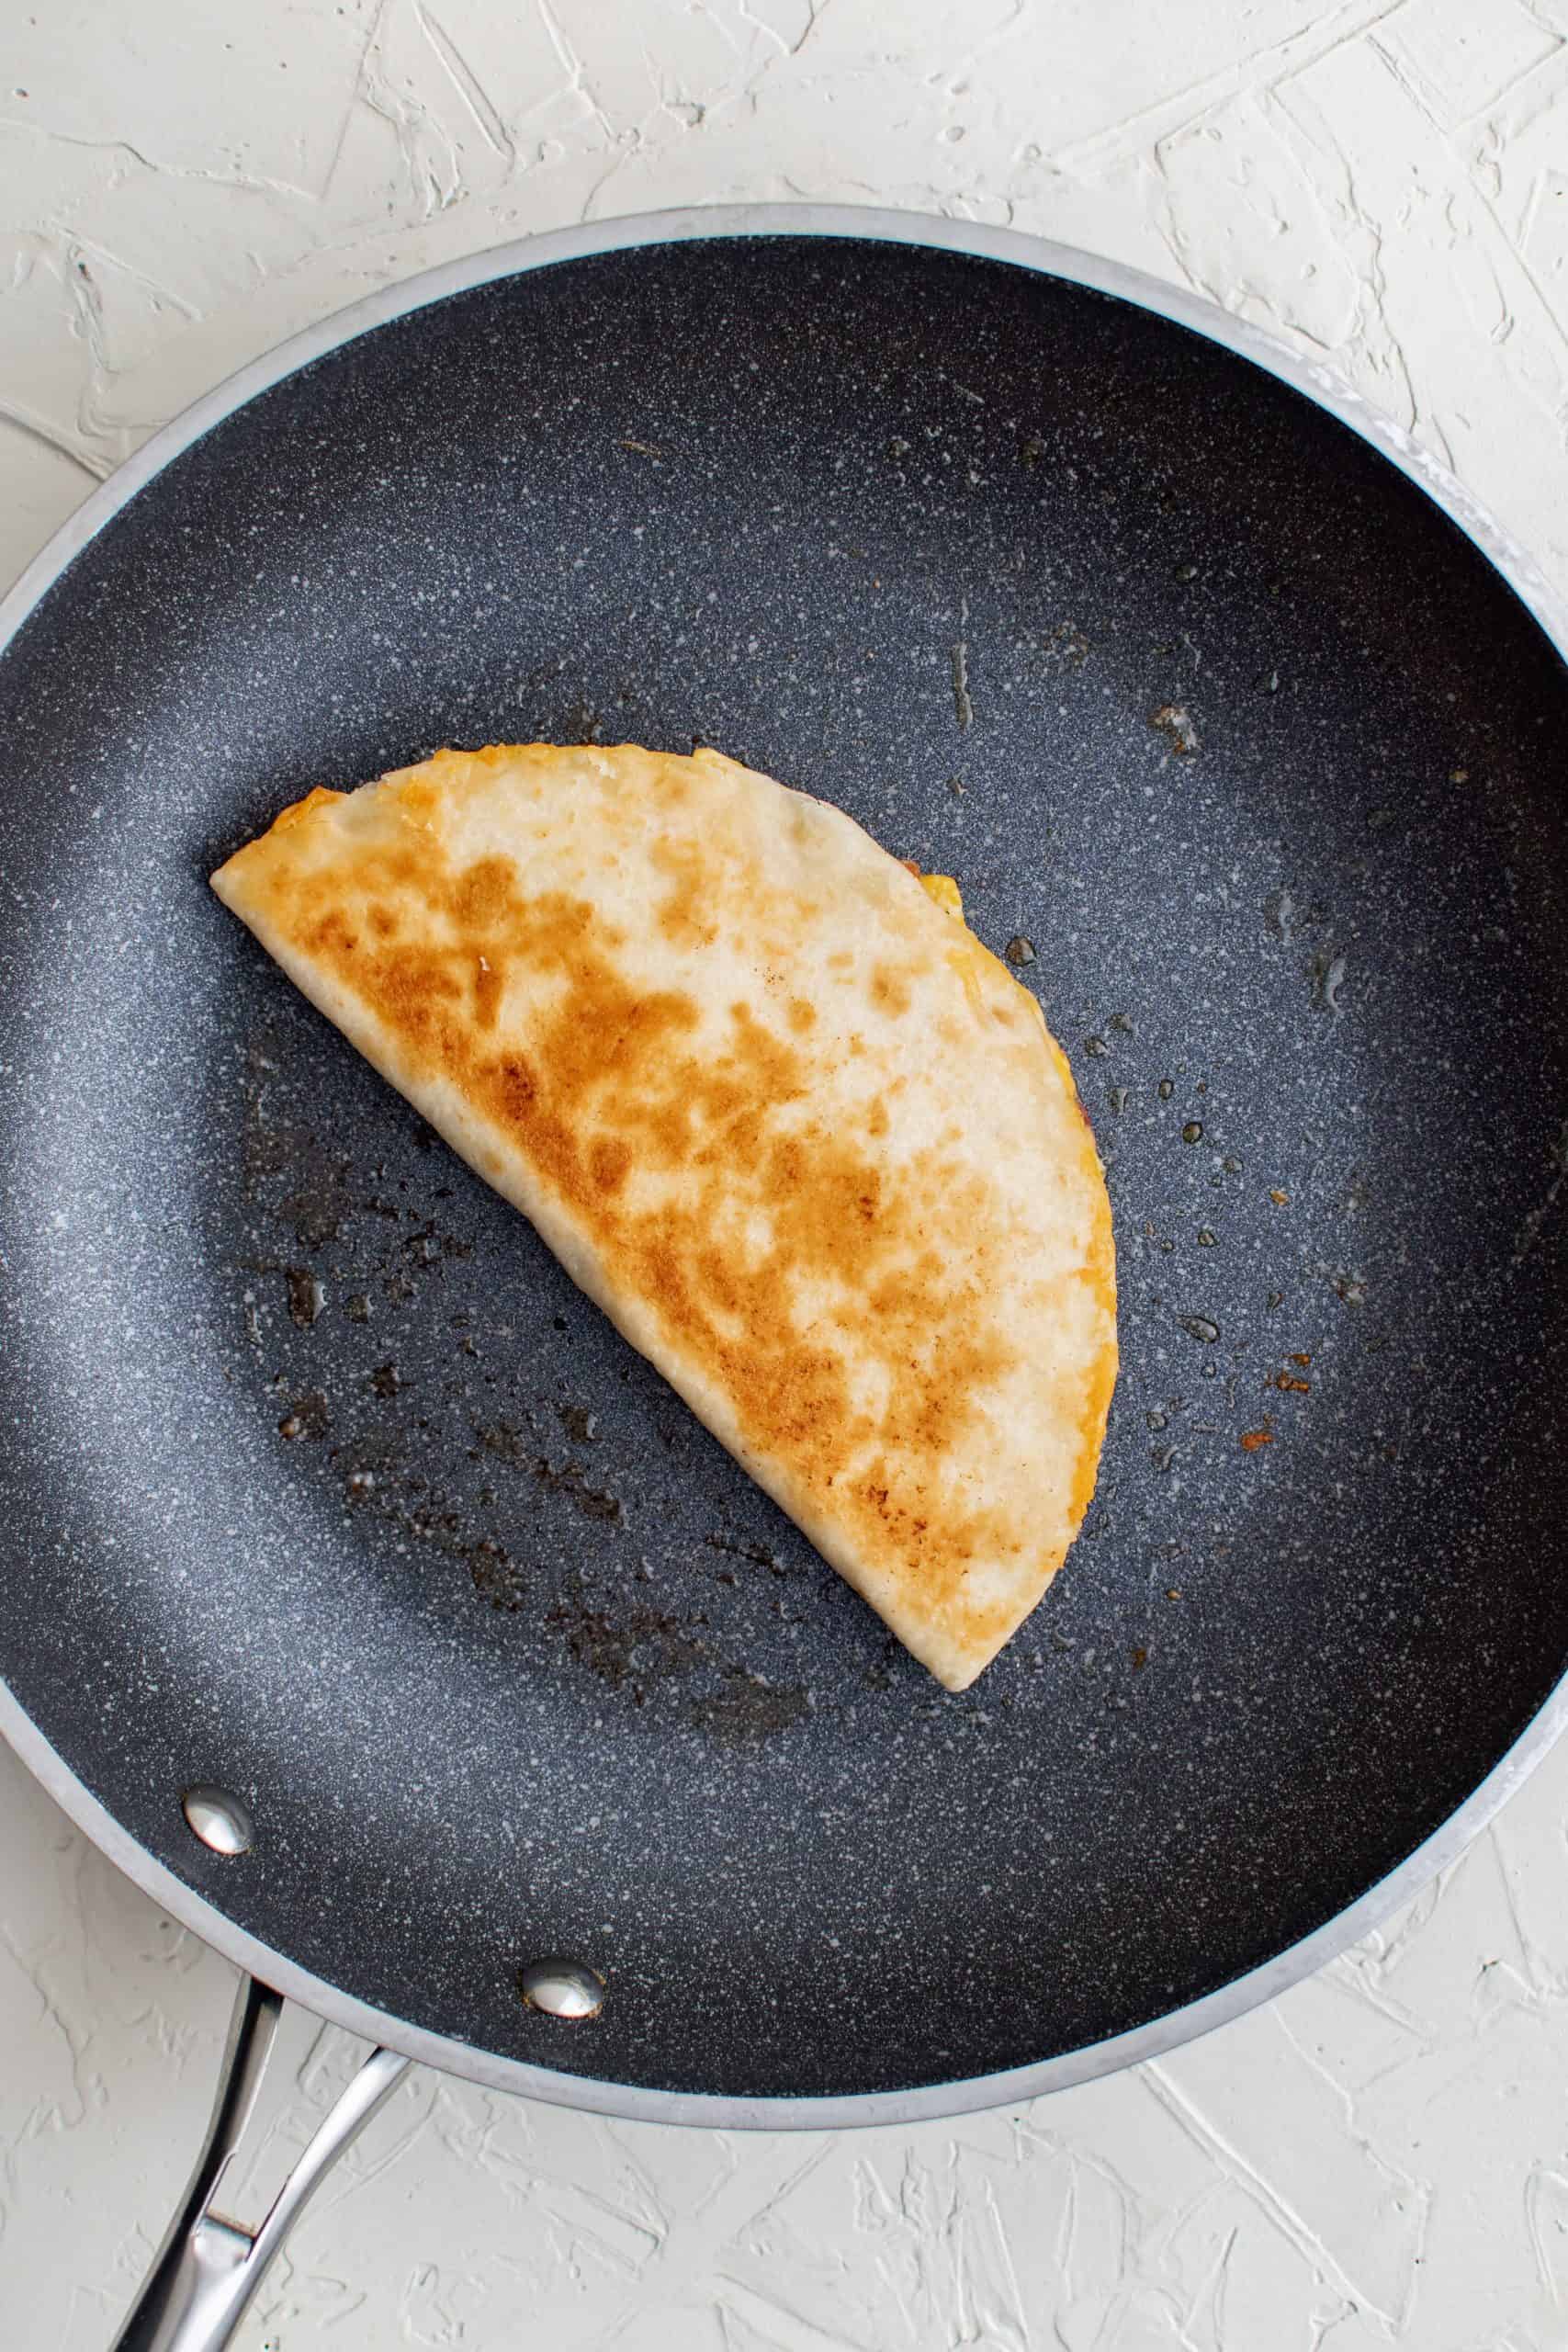 Browned finished quesadilla in pan.